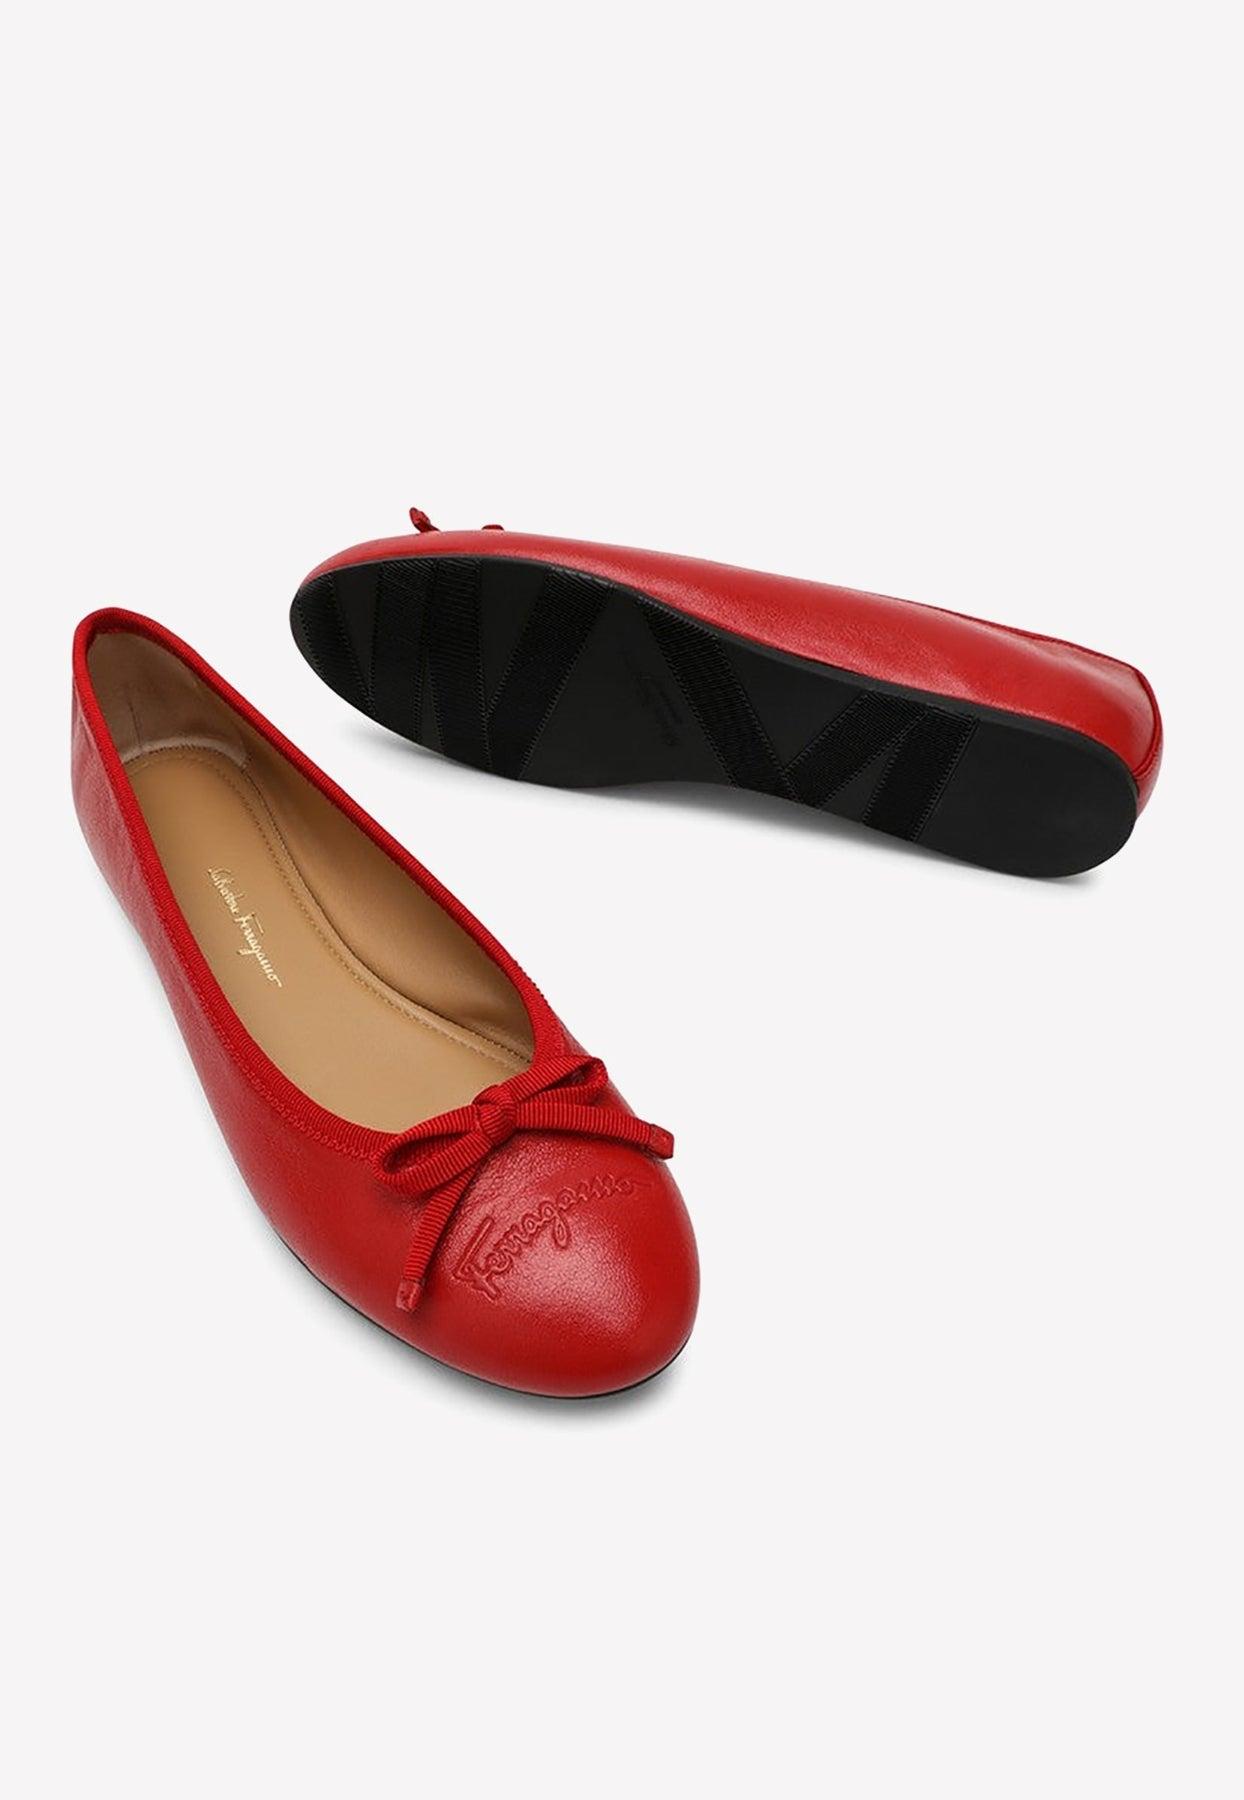 Nebu Anfibio magia Ferragamo Leather Ballet Flats With Bow in Red | Lyst